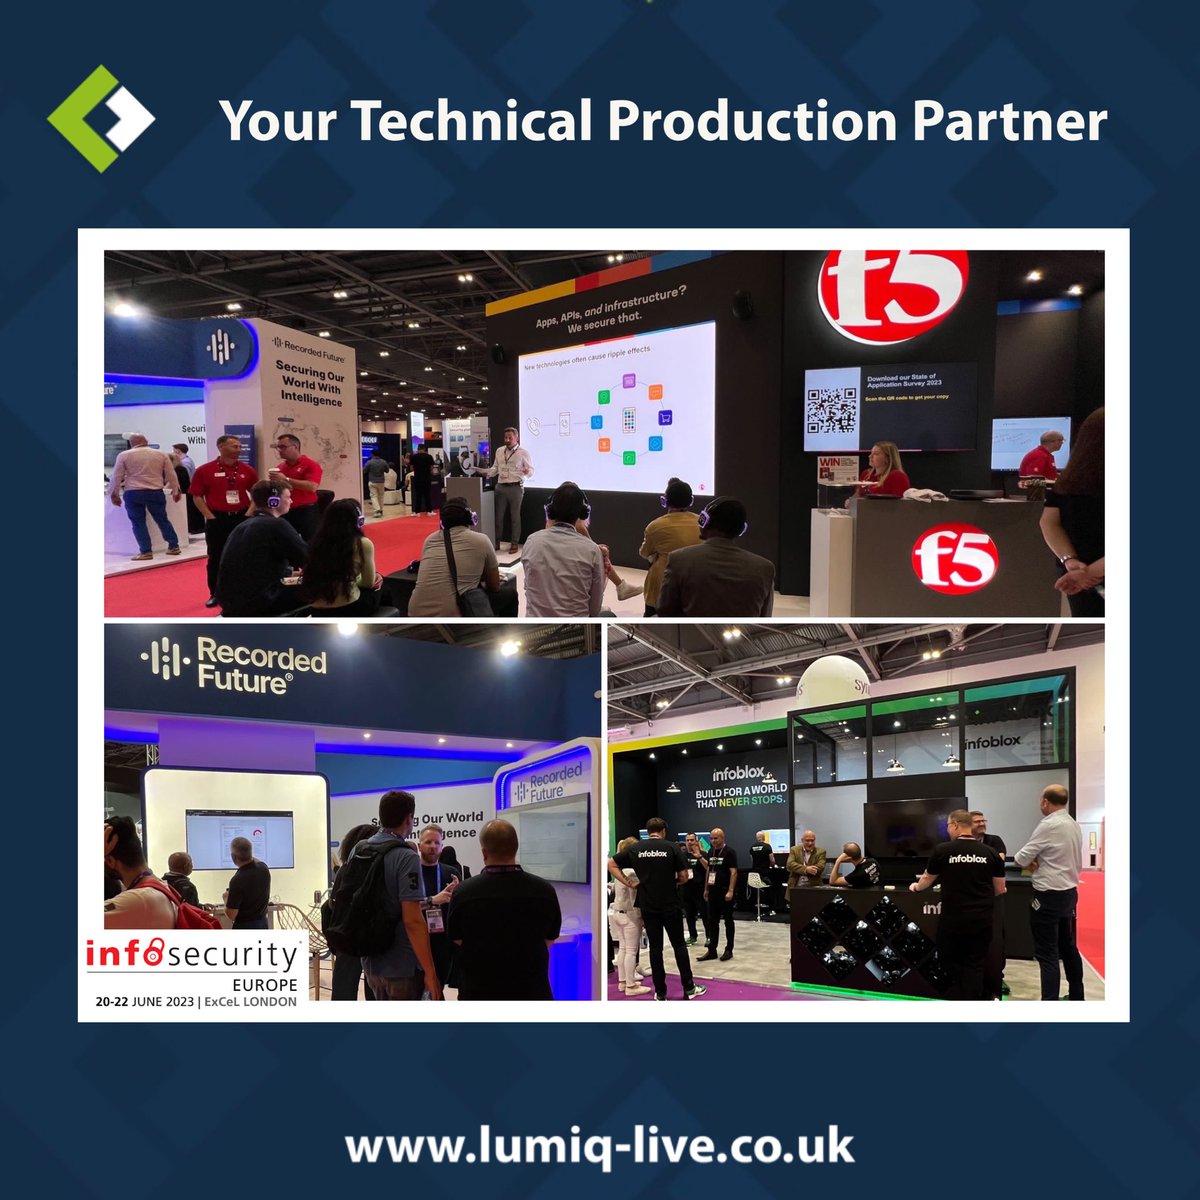 Day one of @Infosecurity at @ExCeLLondon & what a start it’s been! We’re on site providing support to the dream team at @dc3design, multiple stands across the show with LED walls & an assortment of AV & IT equipment it’s keeping the crew on their toes! #eventprofs #AVtweeps